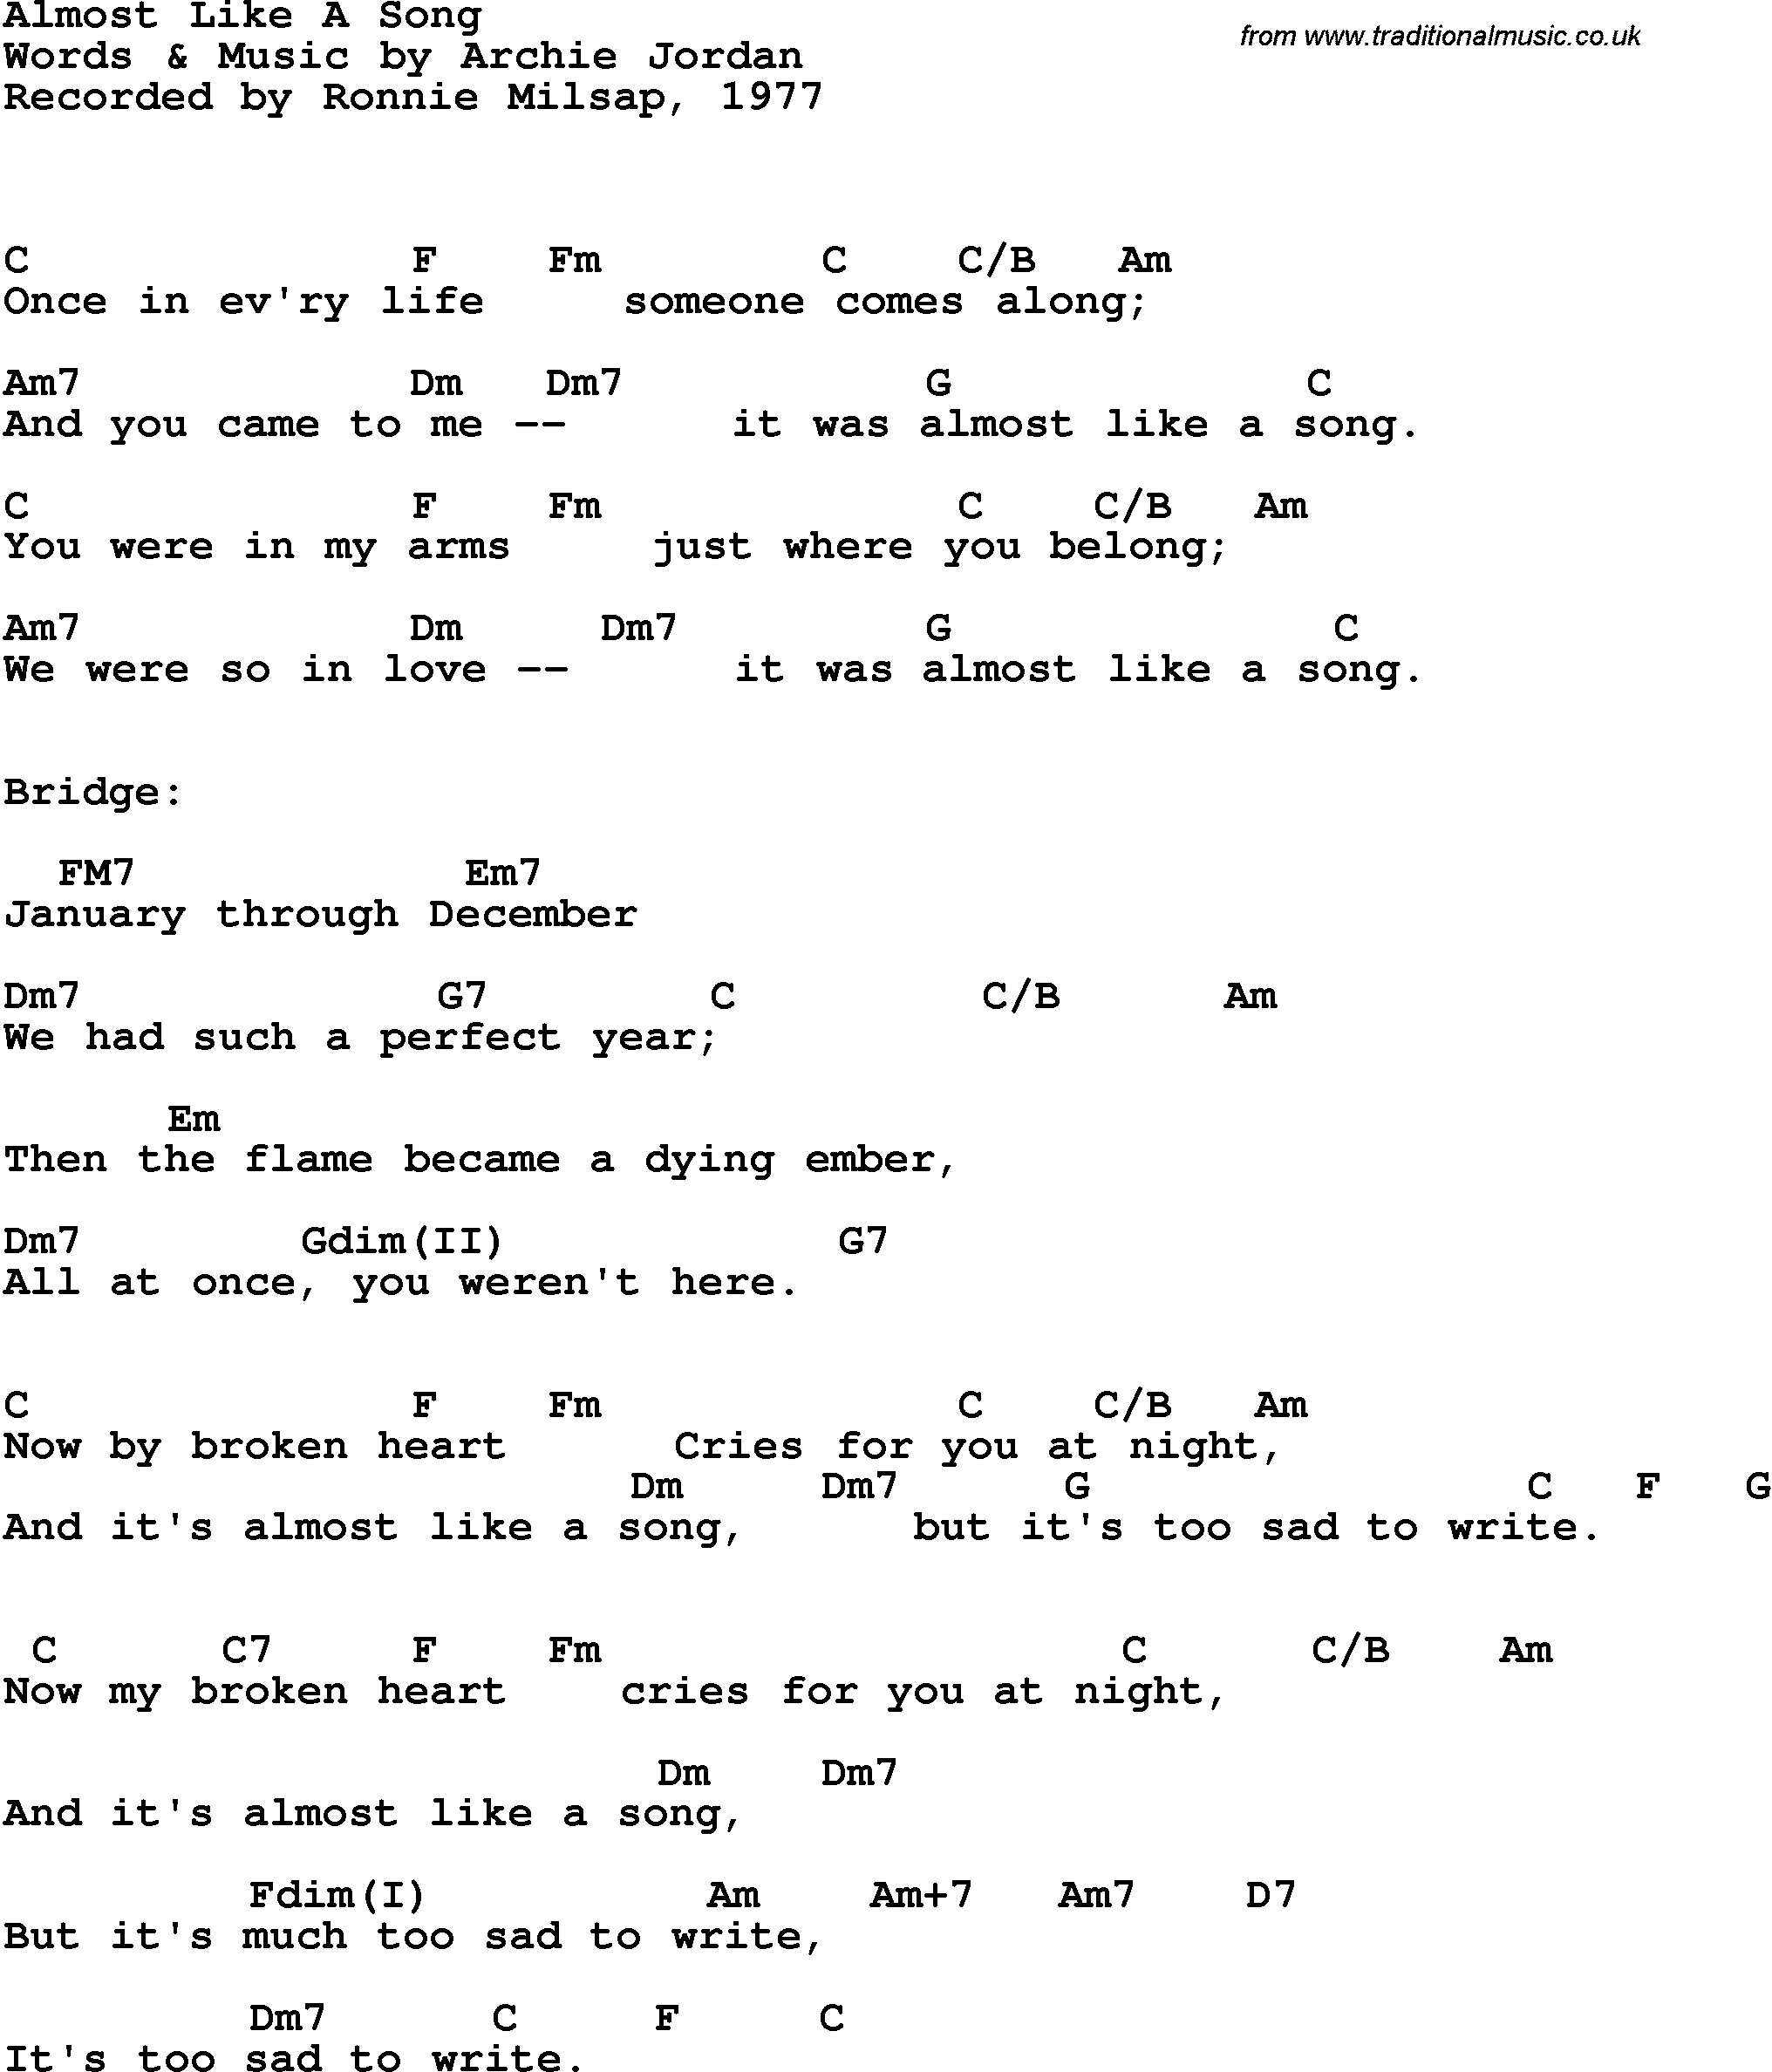 Song Lyrics with guitar chords for Almost Like A Song - Ronnie Milsap, 1977